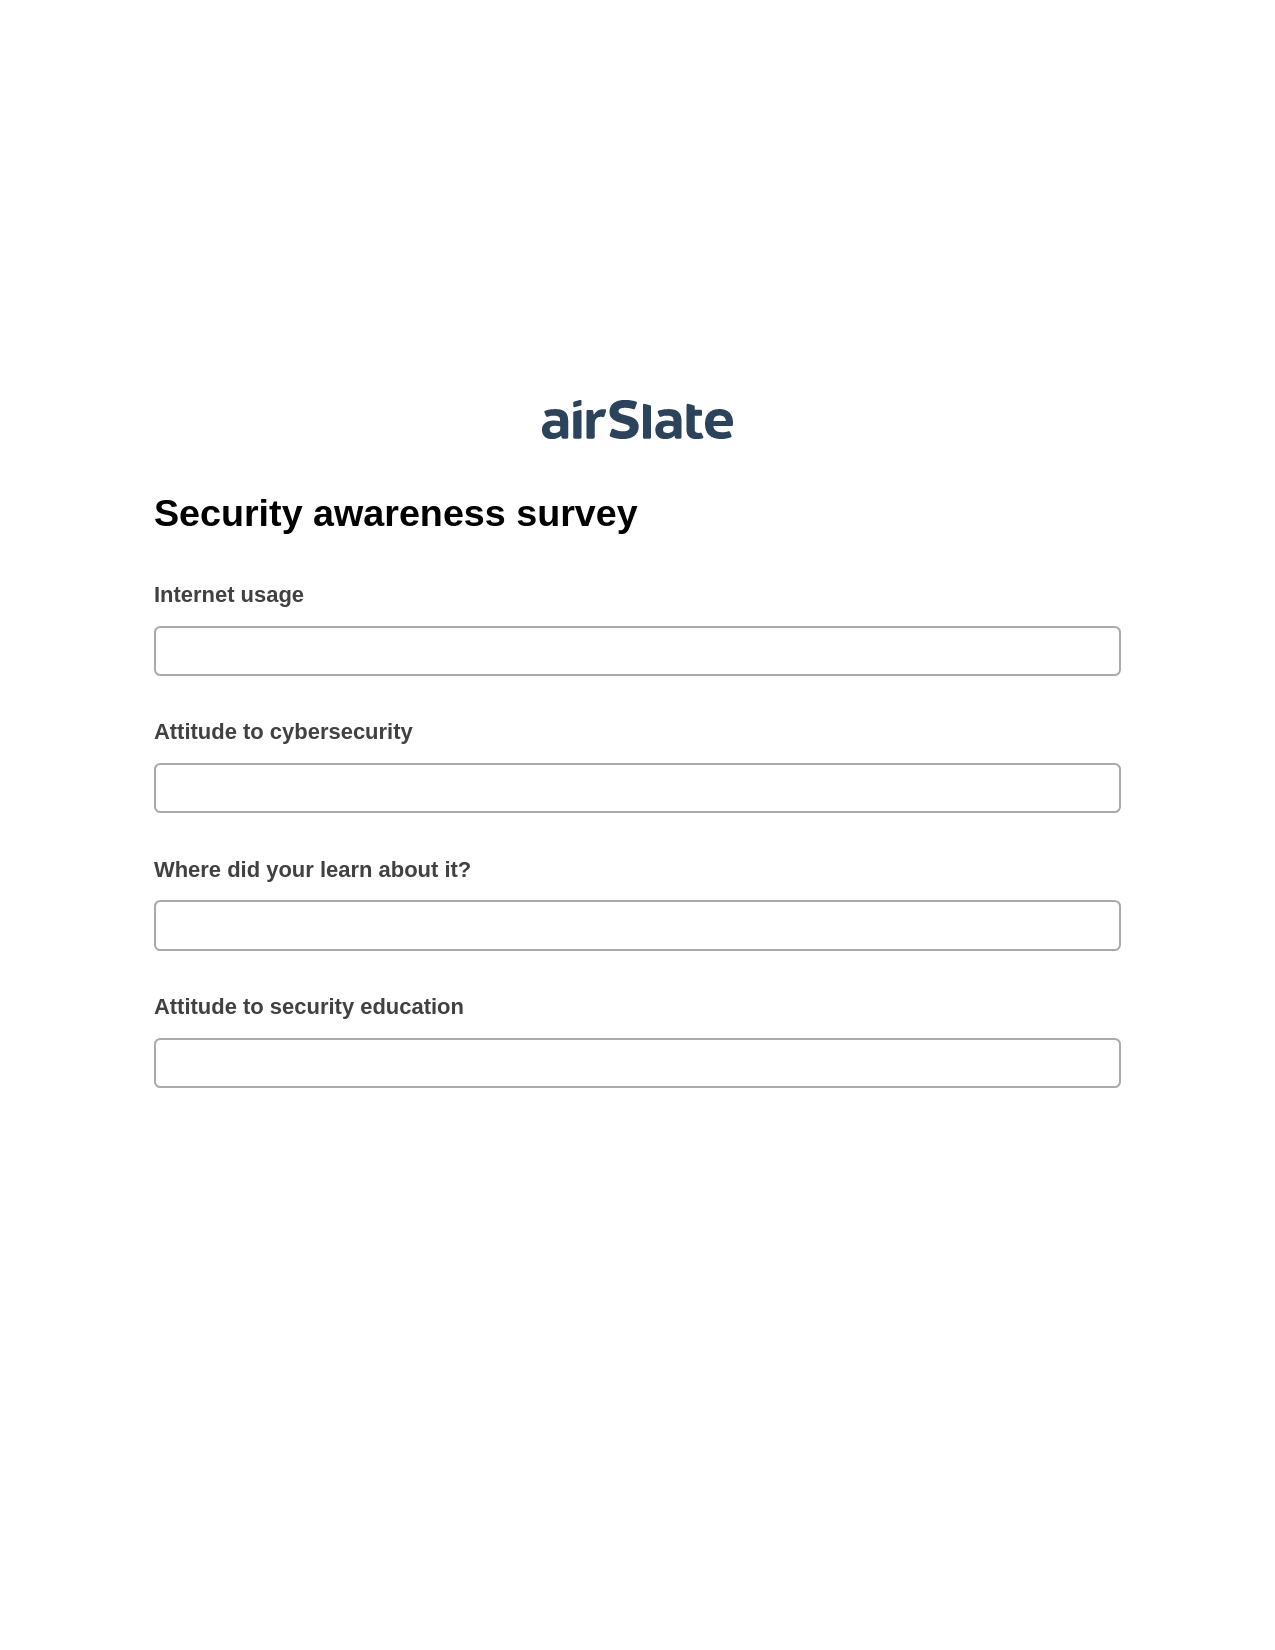 Security awareness survey Pre-fill from Salesforce Records with SOQL Bot, Update NetSuite Records Bot, Export to Smartsheet